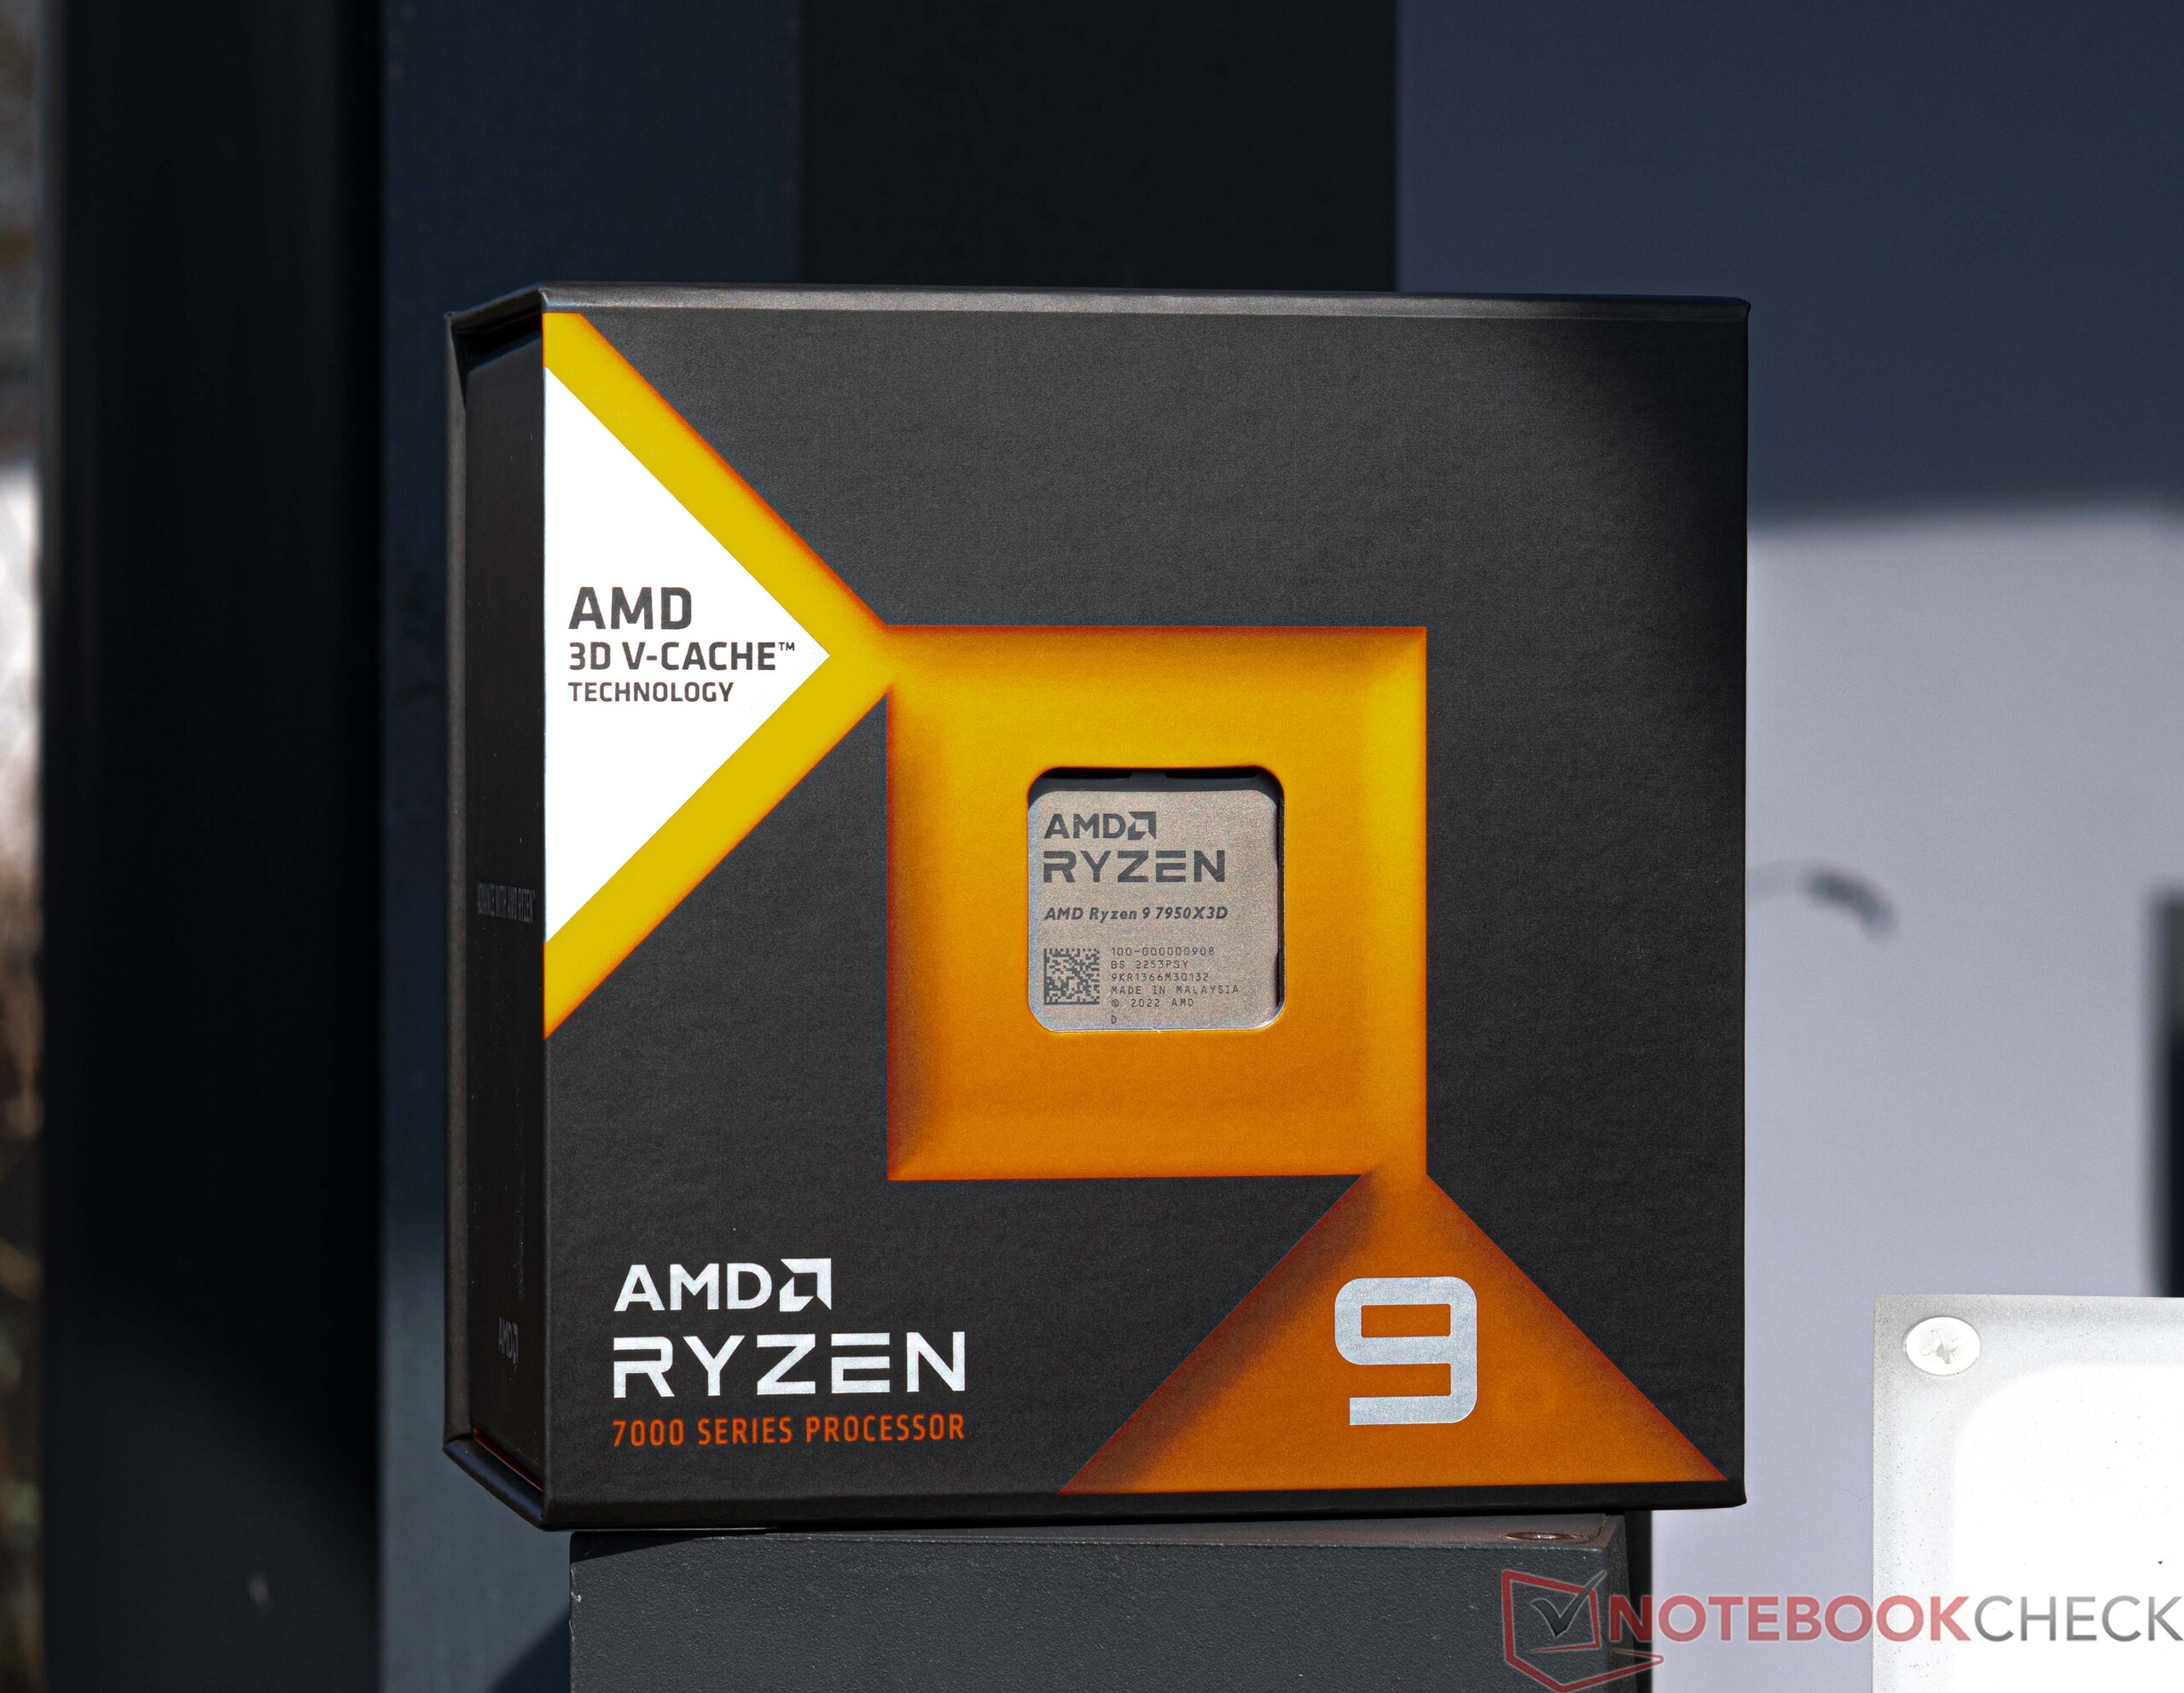 AMD Ryzen 9 7950X3D Desktop CPU review: New gaming flagship with 